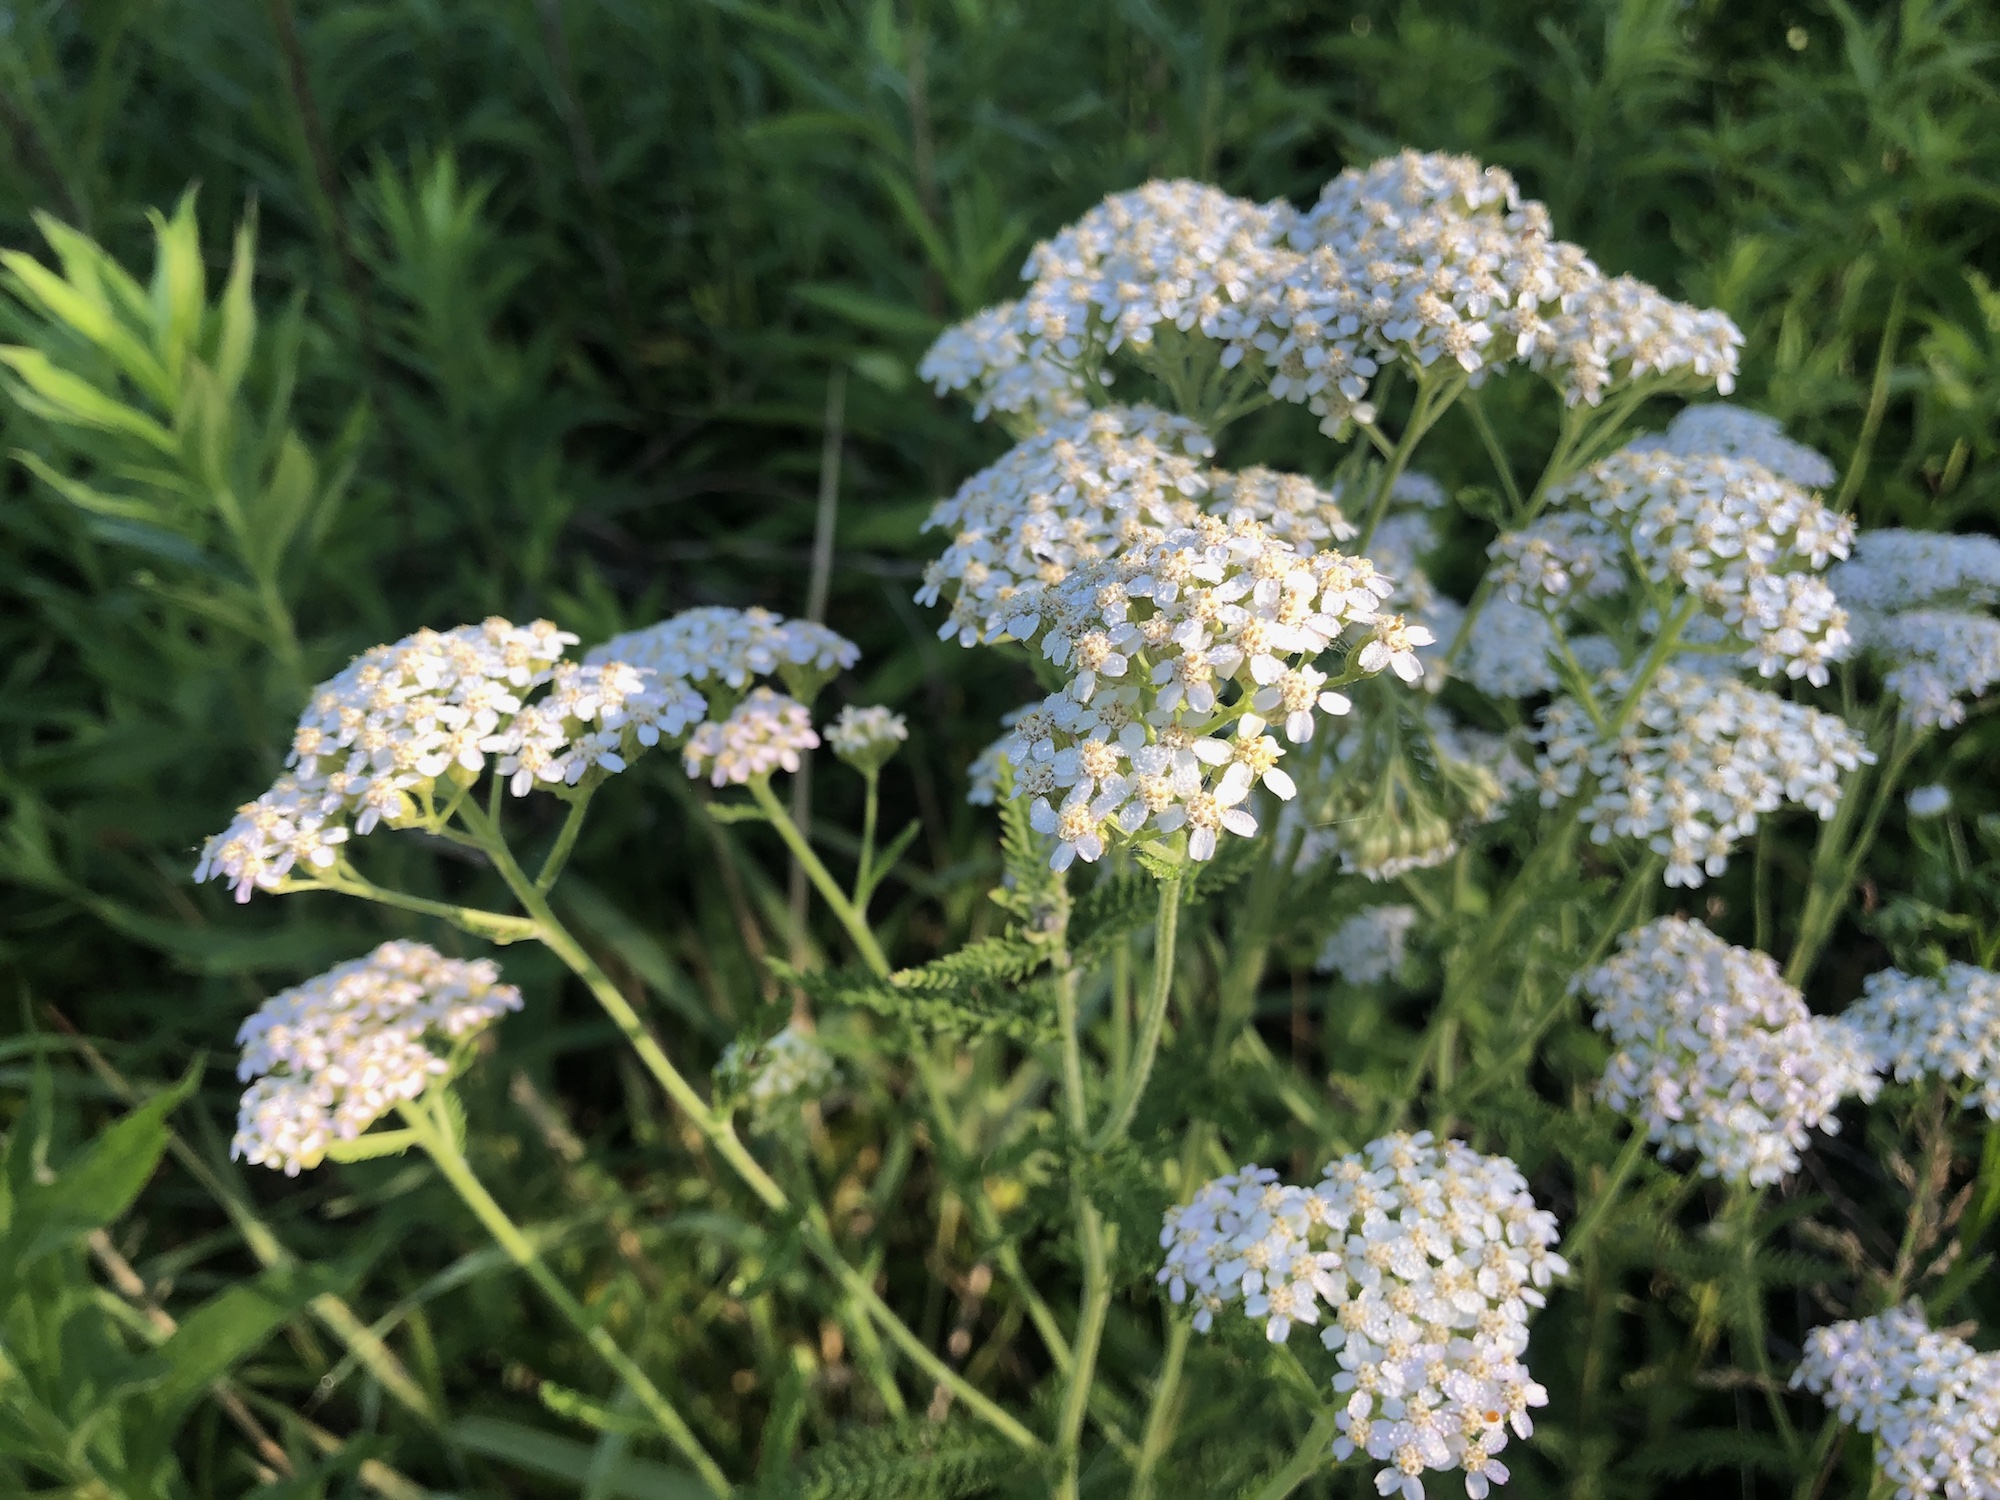 Common Yarrow on shore of Marion Dunn Pond on June 17, 2020.